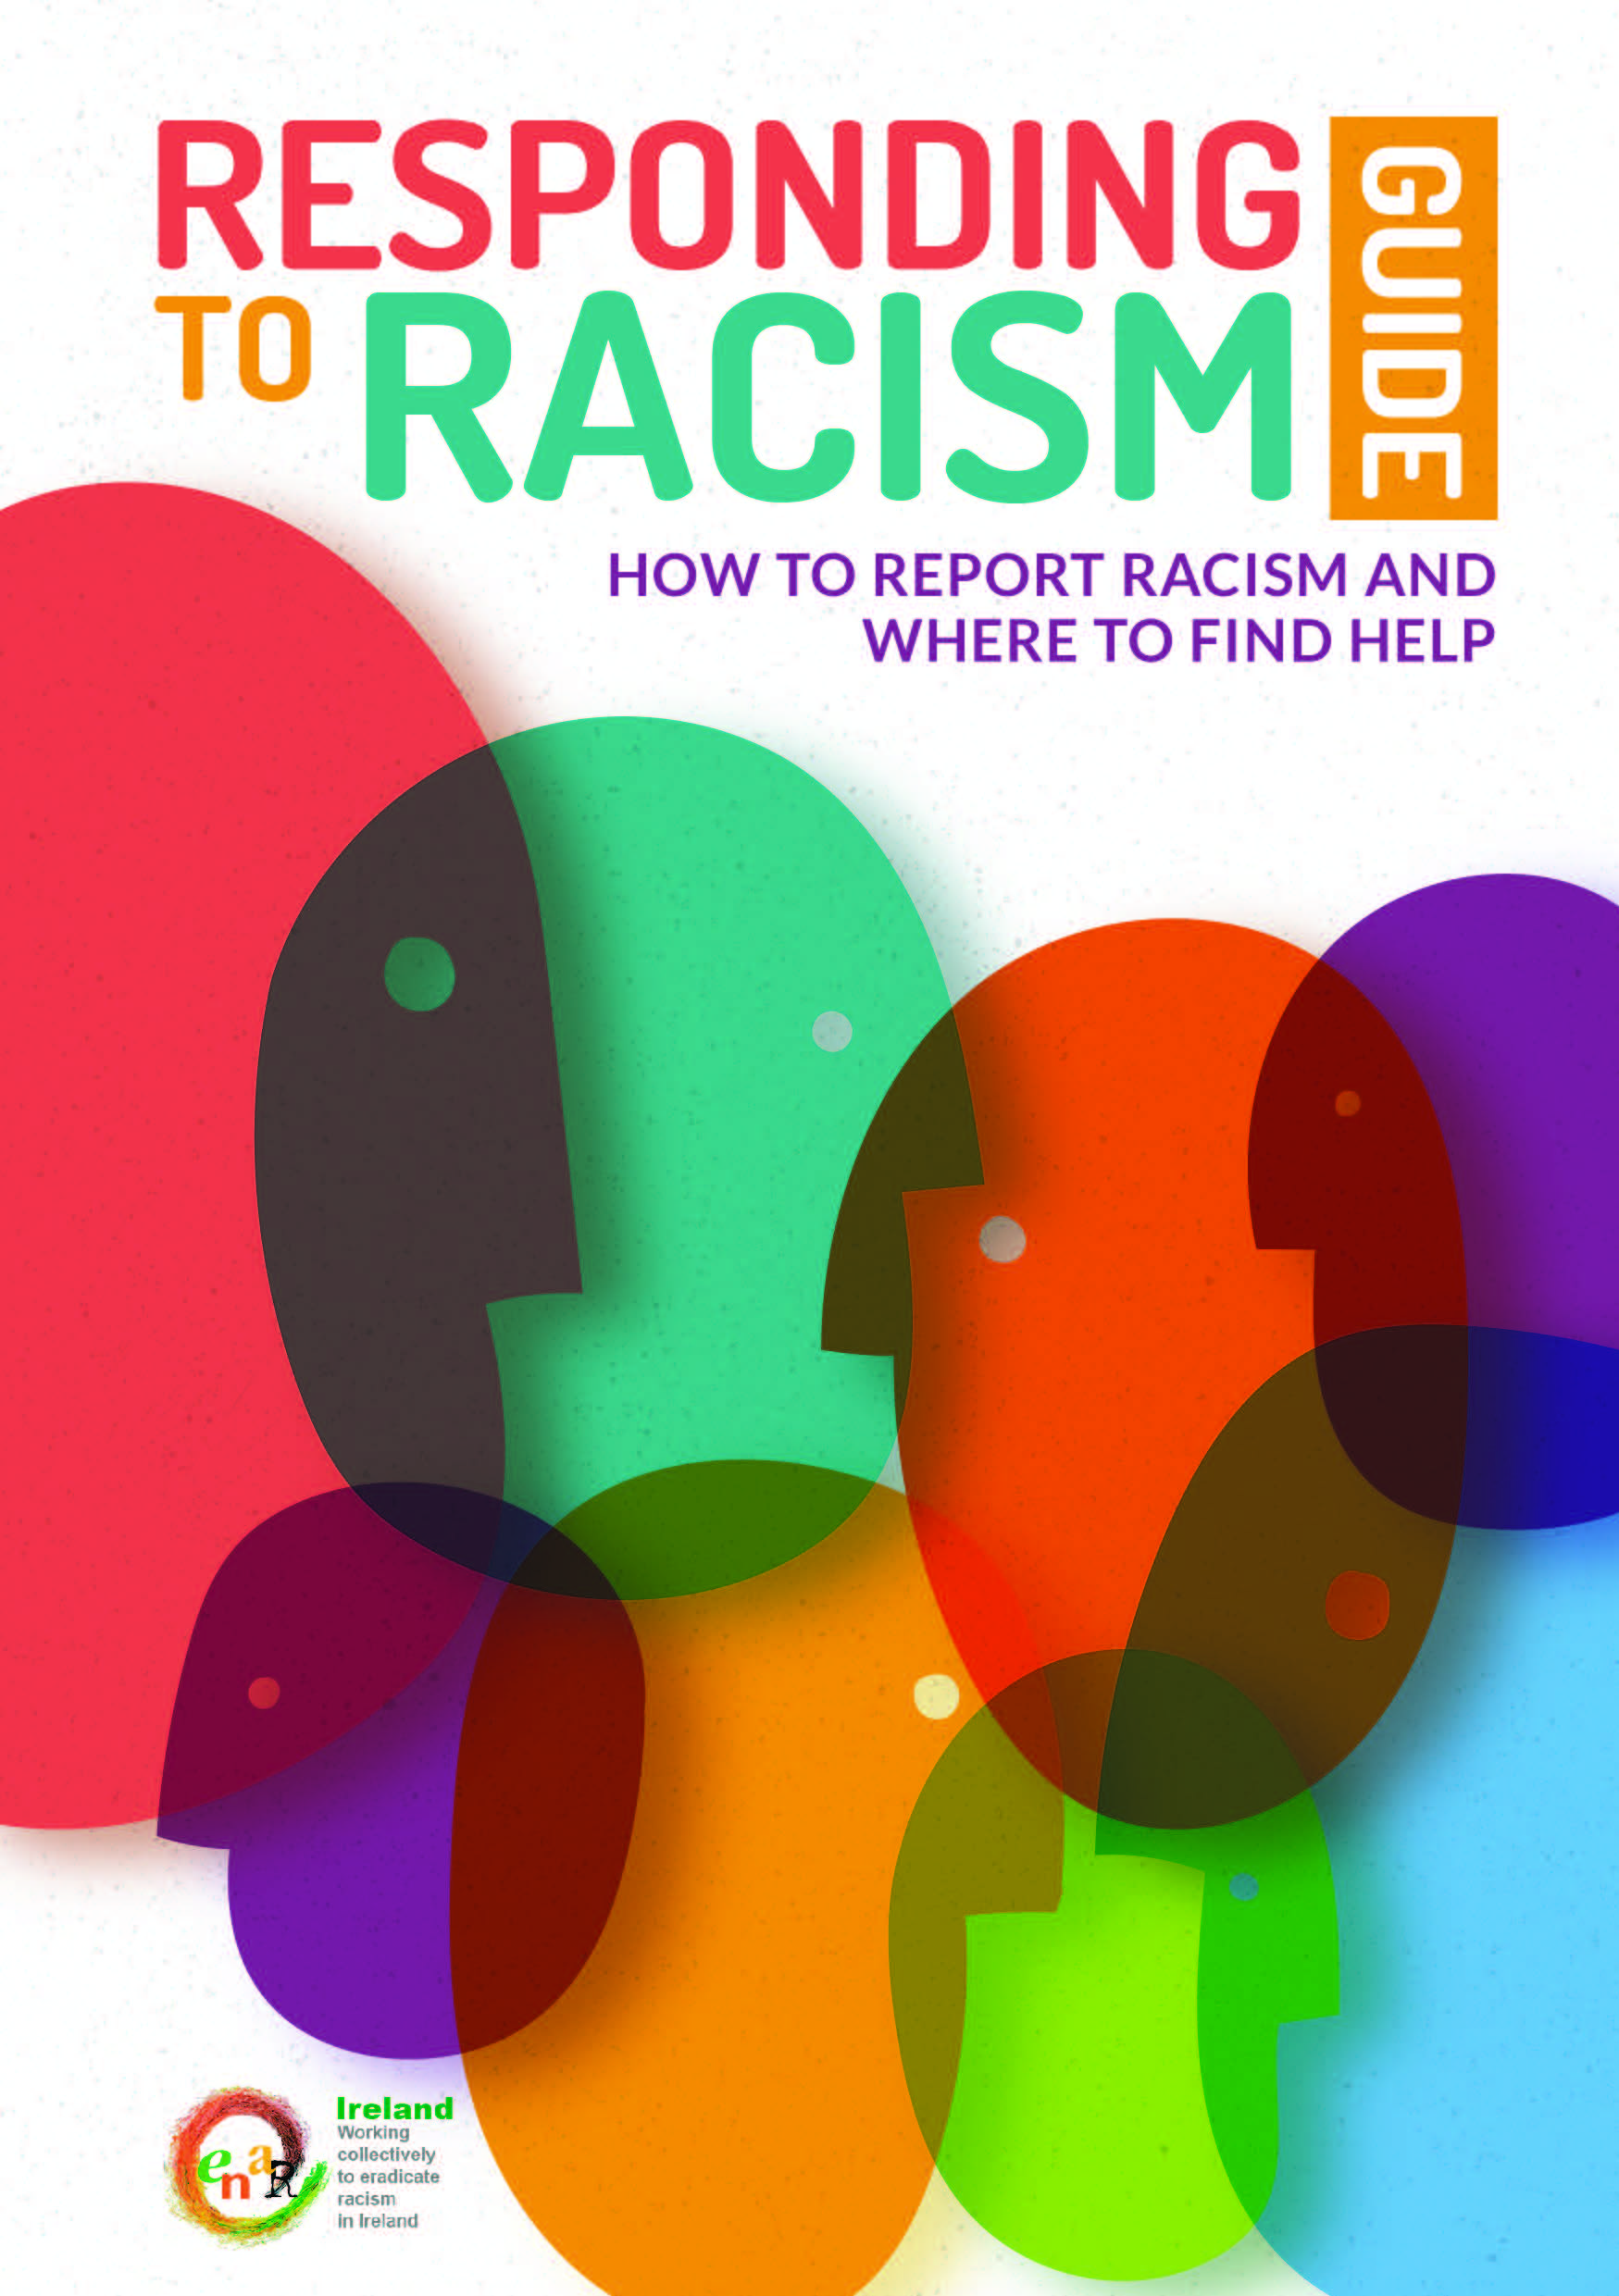 Irish Network Against Racism’s Responding to Racism Guide 